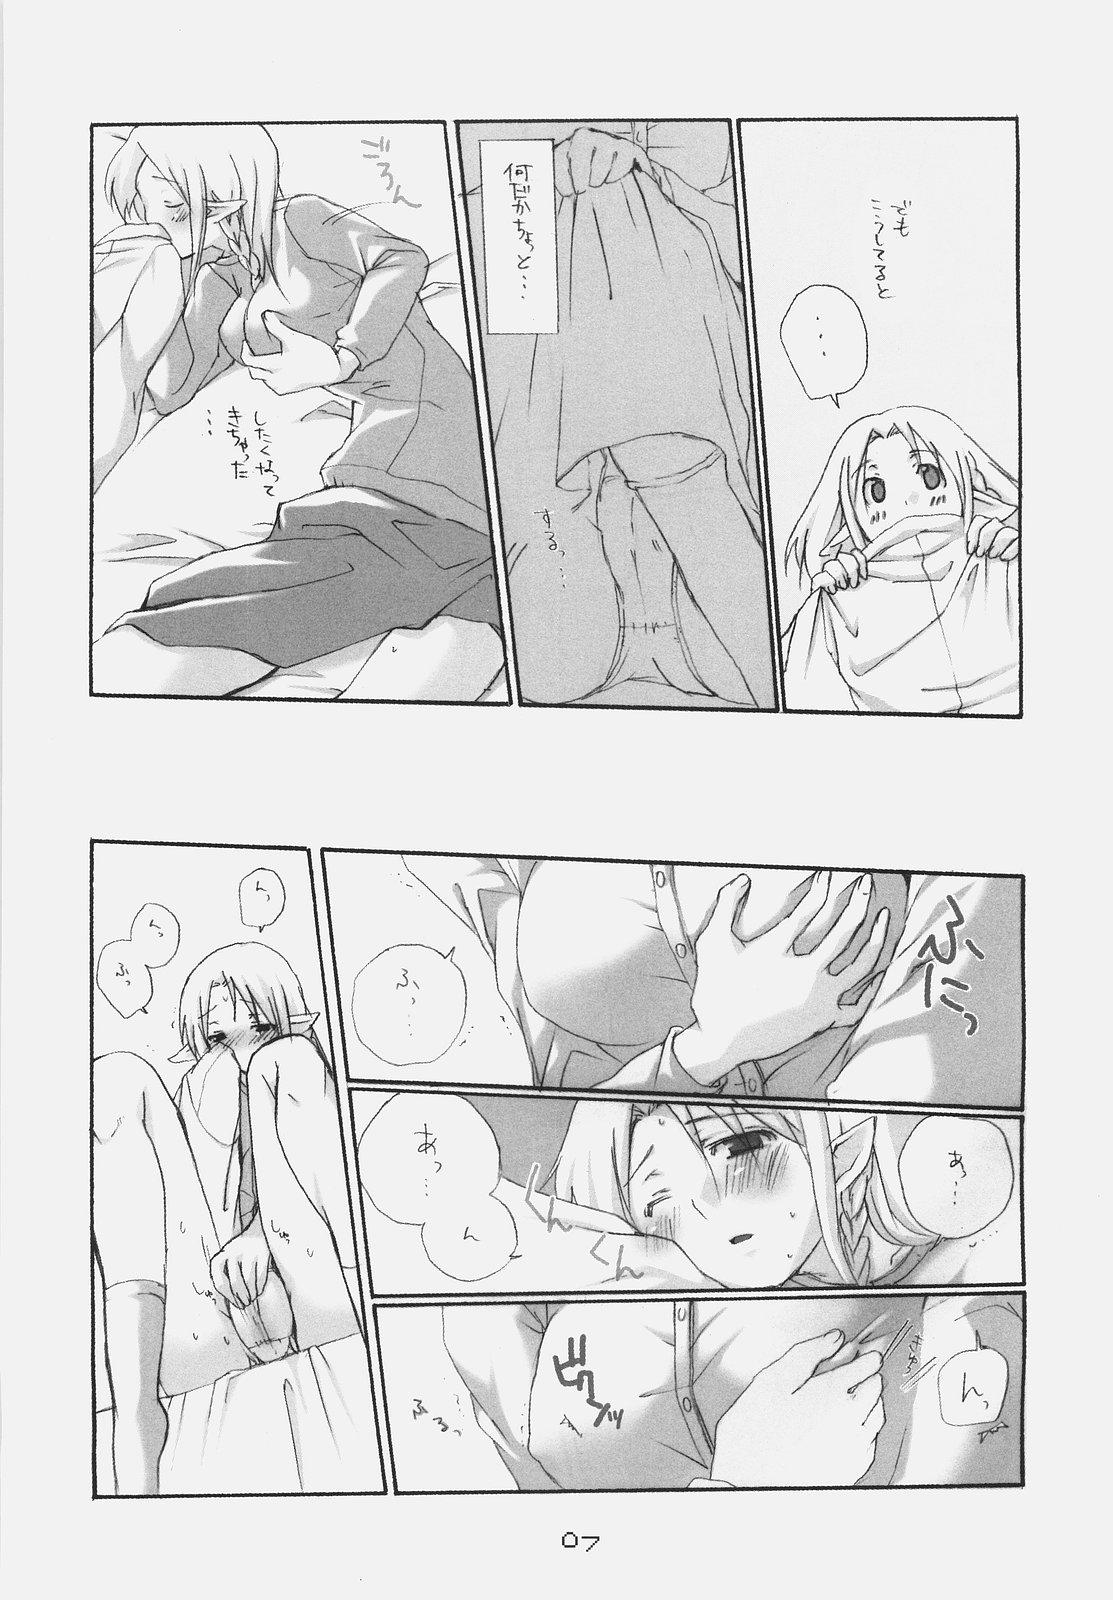 Boy Girl SKB - Fate stay night Creampies - Page 6